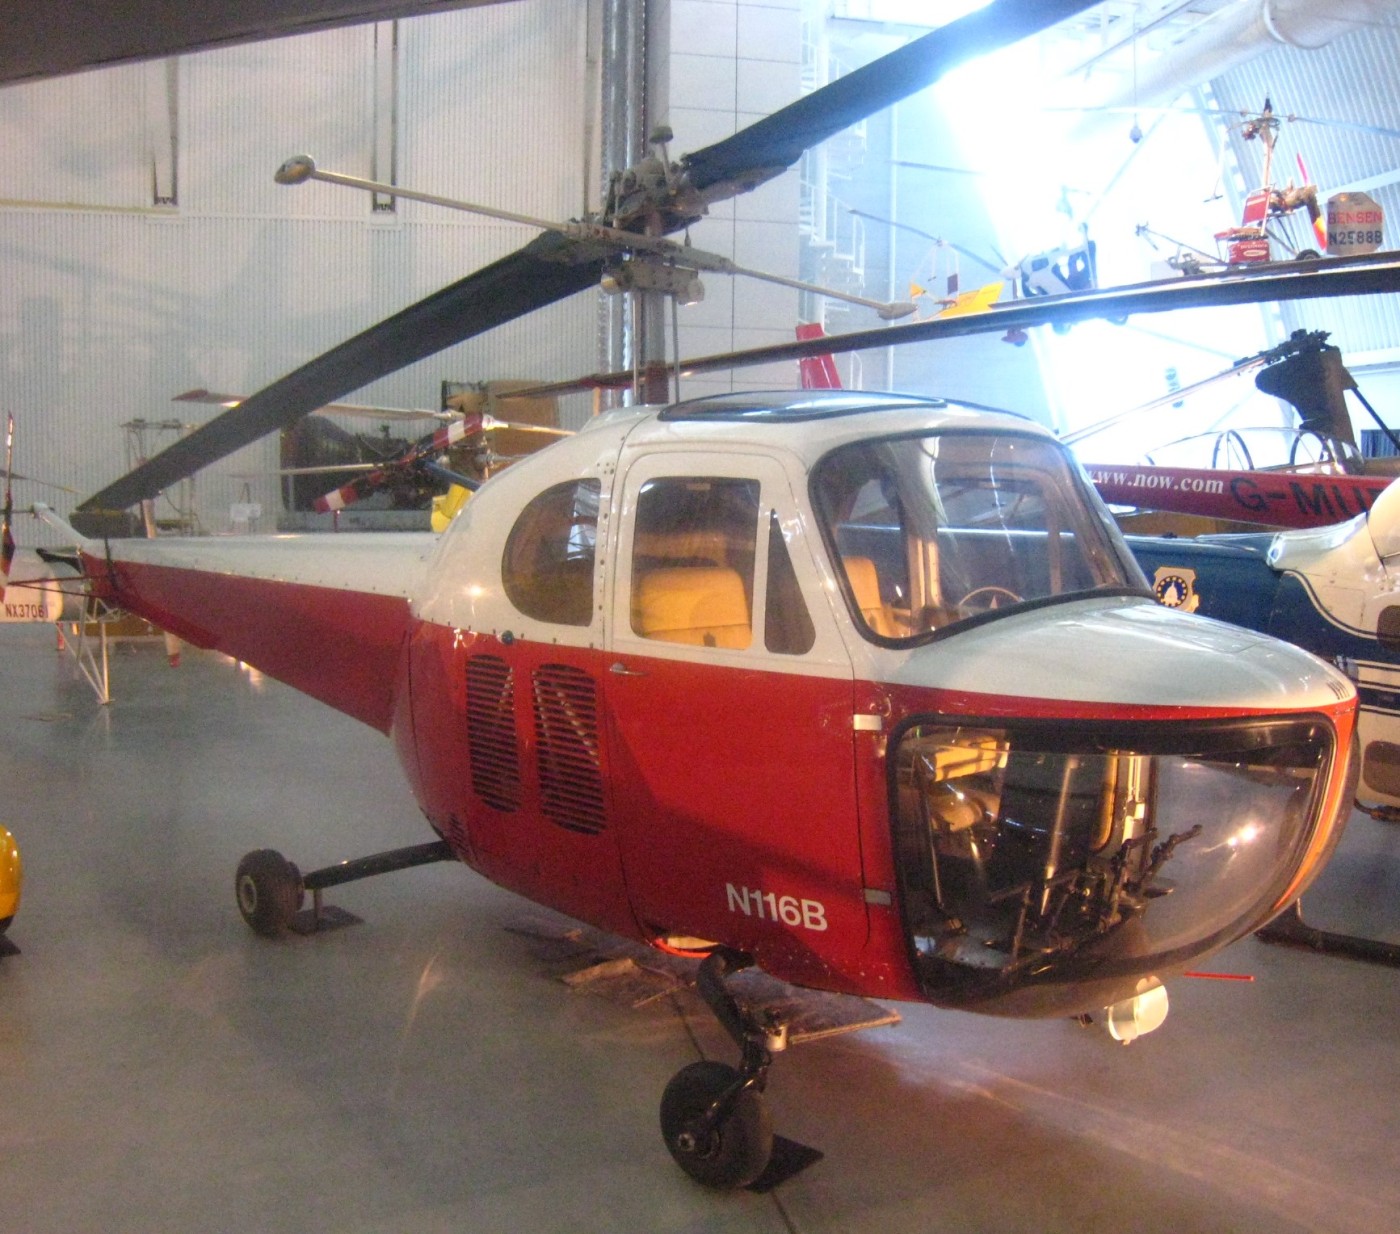 1946: A Significant Advance for Helicopters – Transportation History